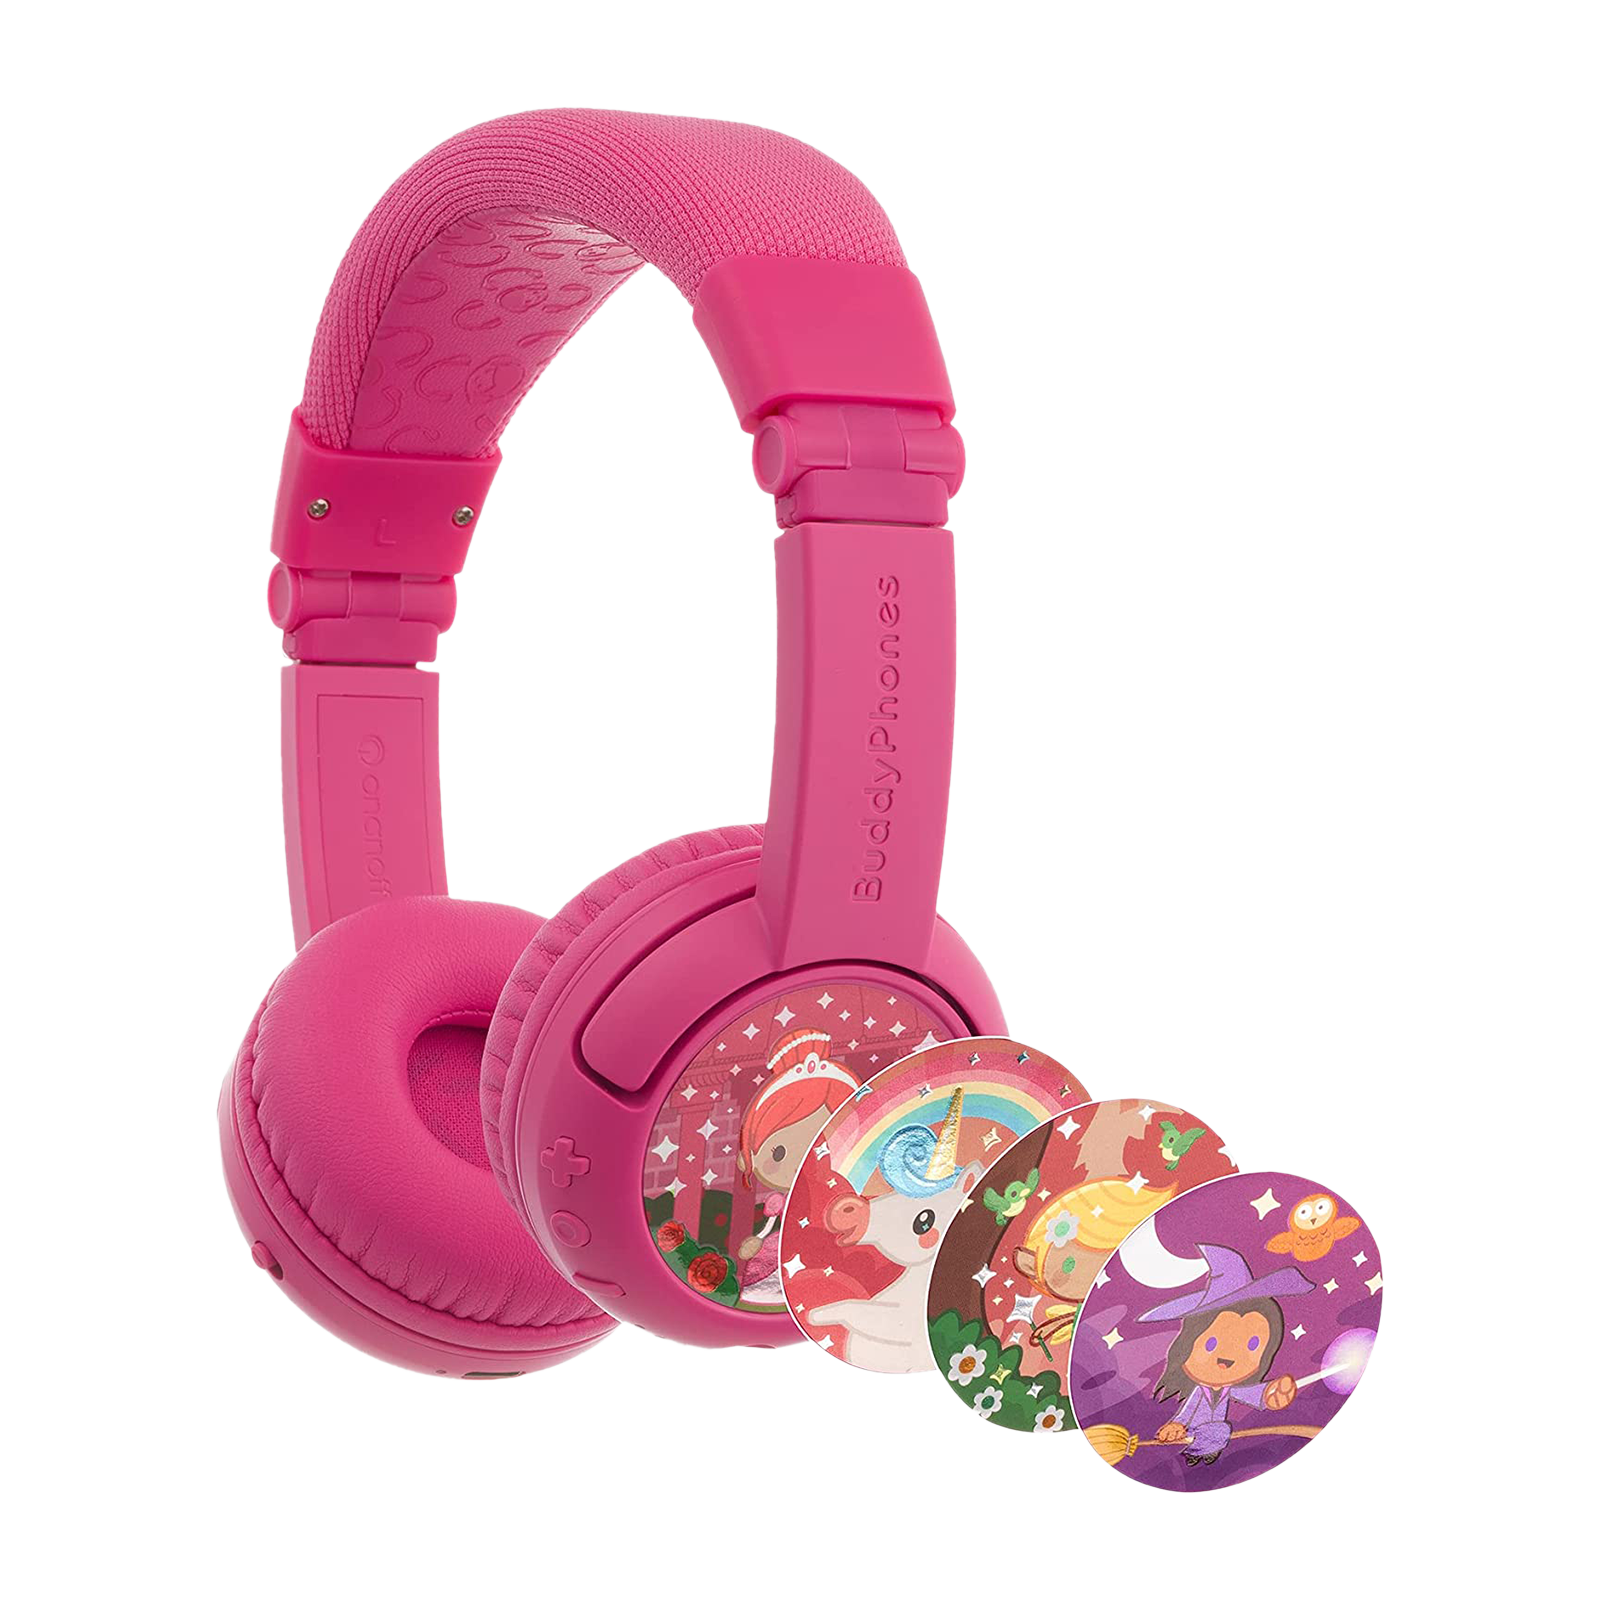 onanoff BuddyPhones Play Plus BT-BP-PLAYP-PINK Bluetooth Headset with Mic (Upto 20 Hours Playback, On Ear, Rose Pink)